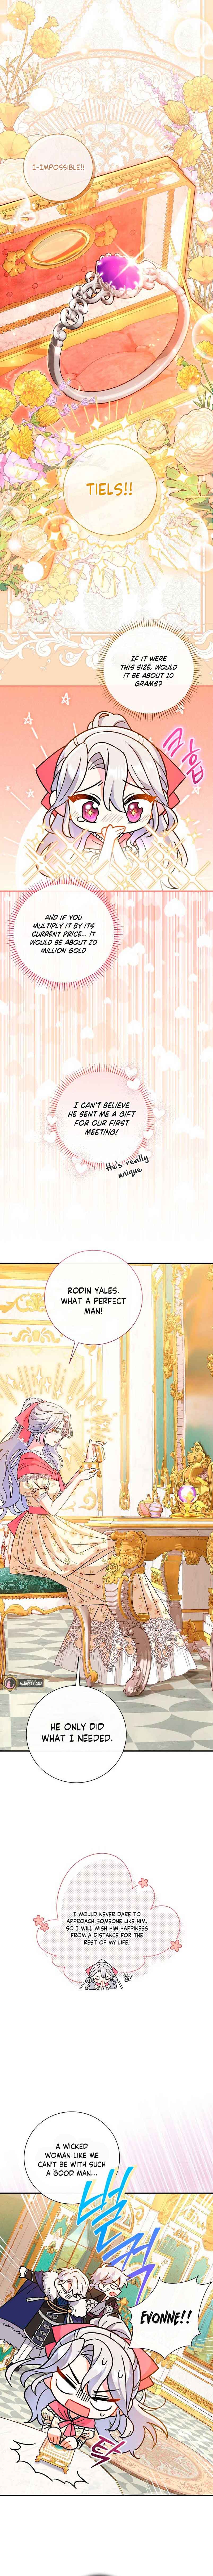 The Villain’s Match Is Too Perfect chapter 7